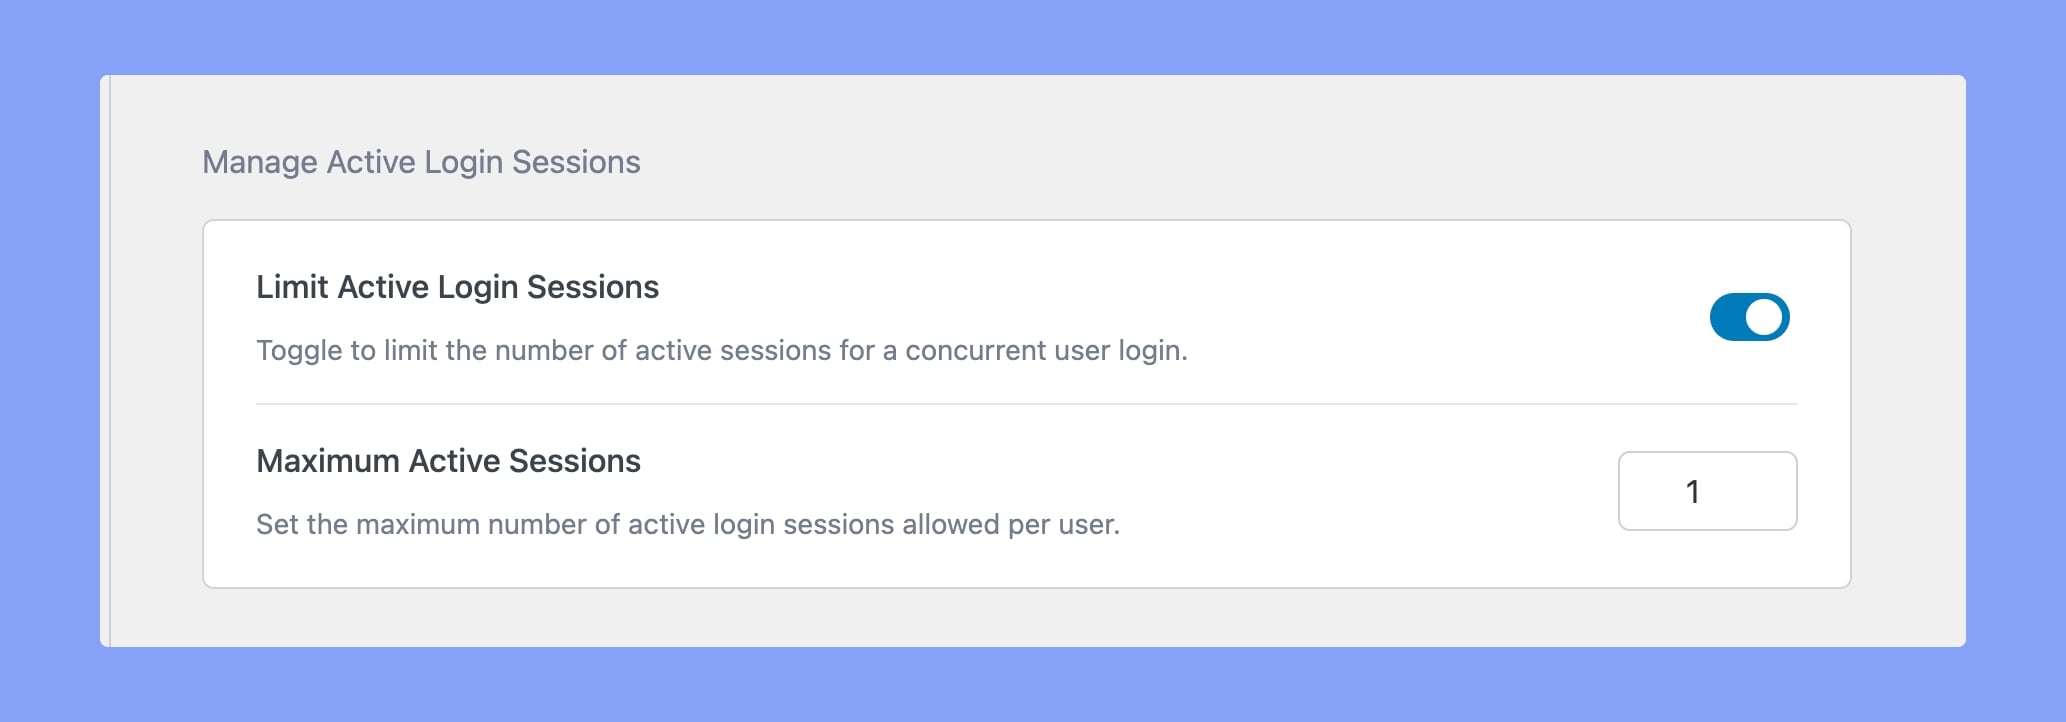 Multiple active login sessions